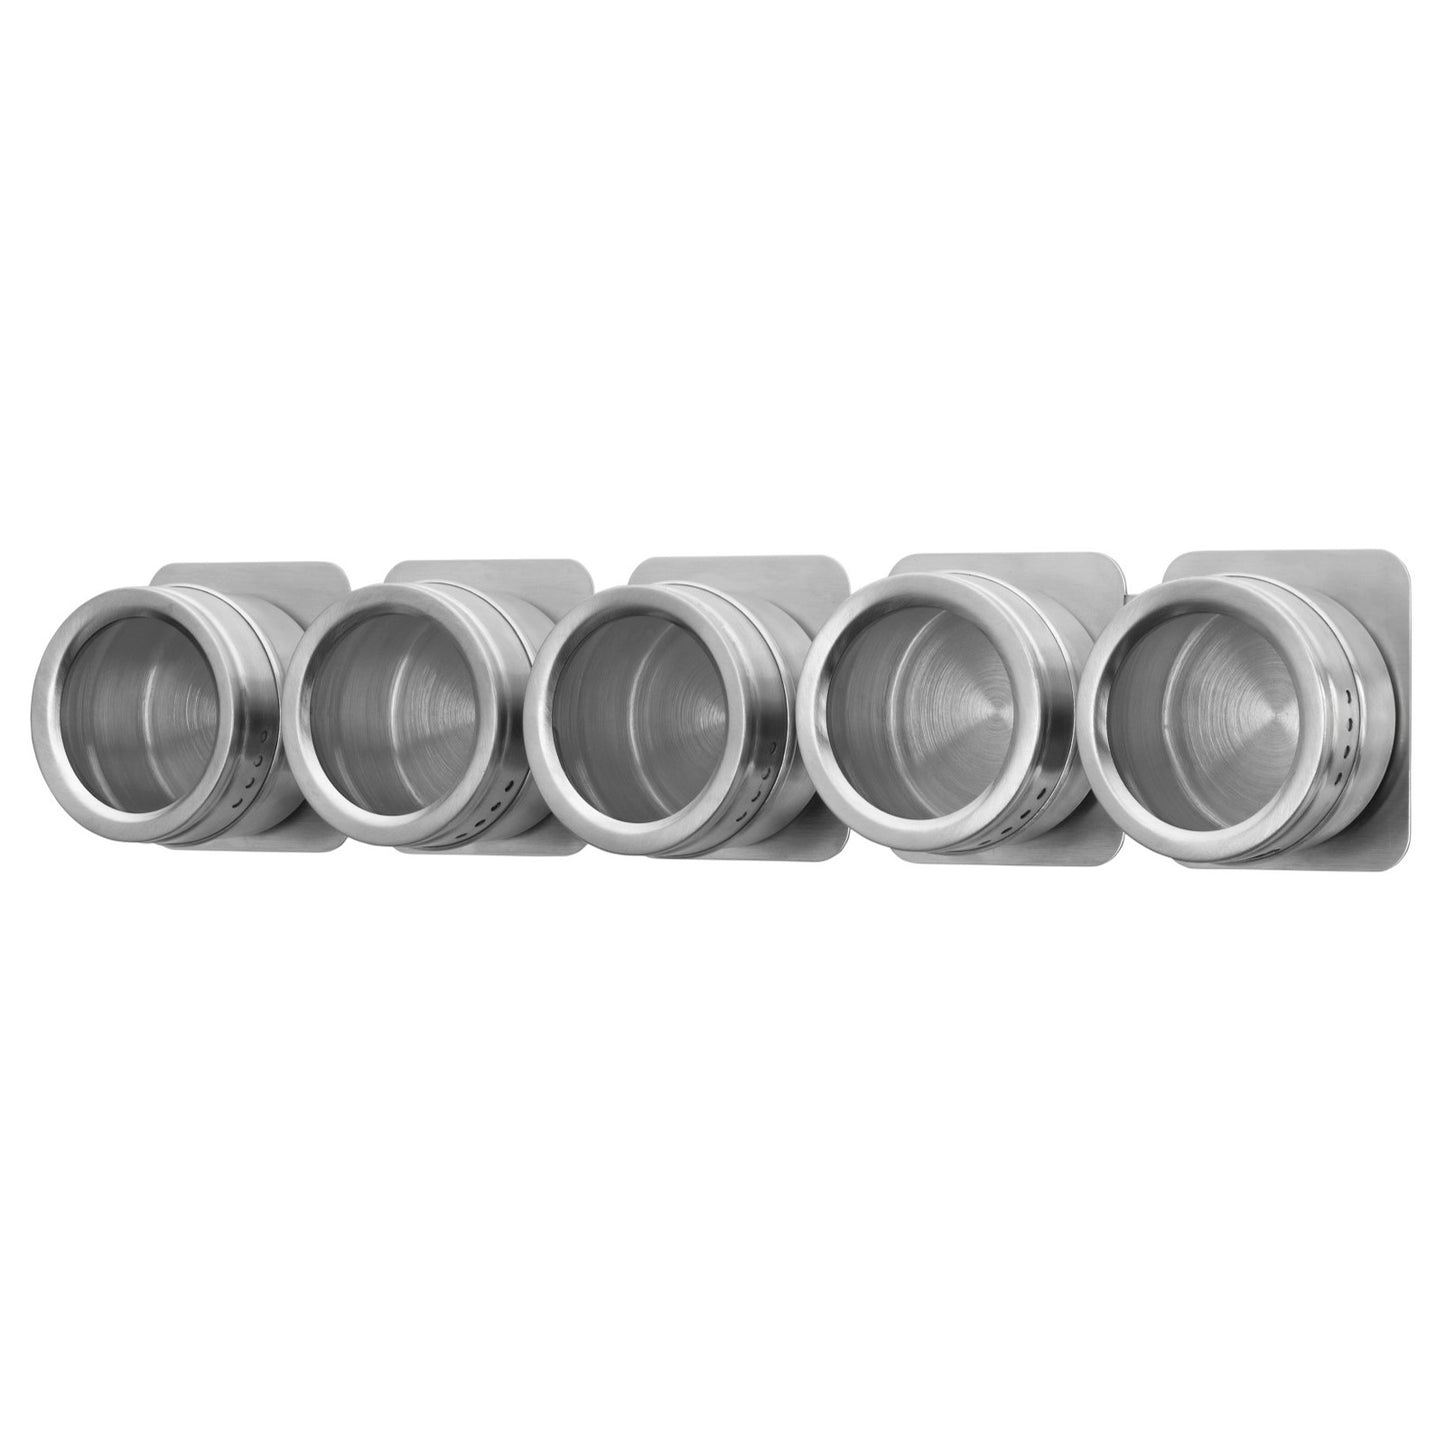 Set of 5 Stainless Steel Magnetic Tins + Wall Mounting Plate